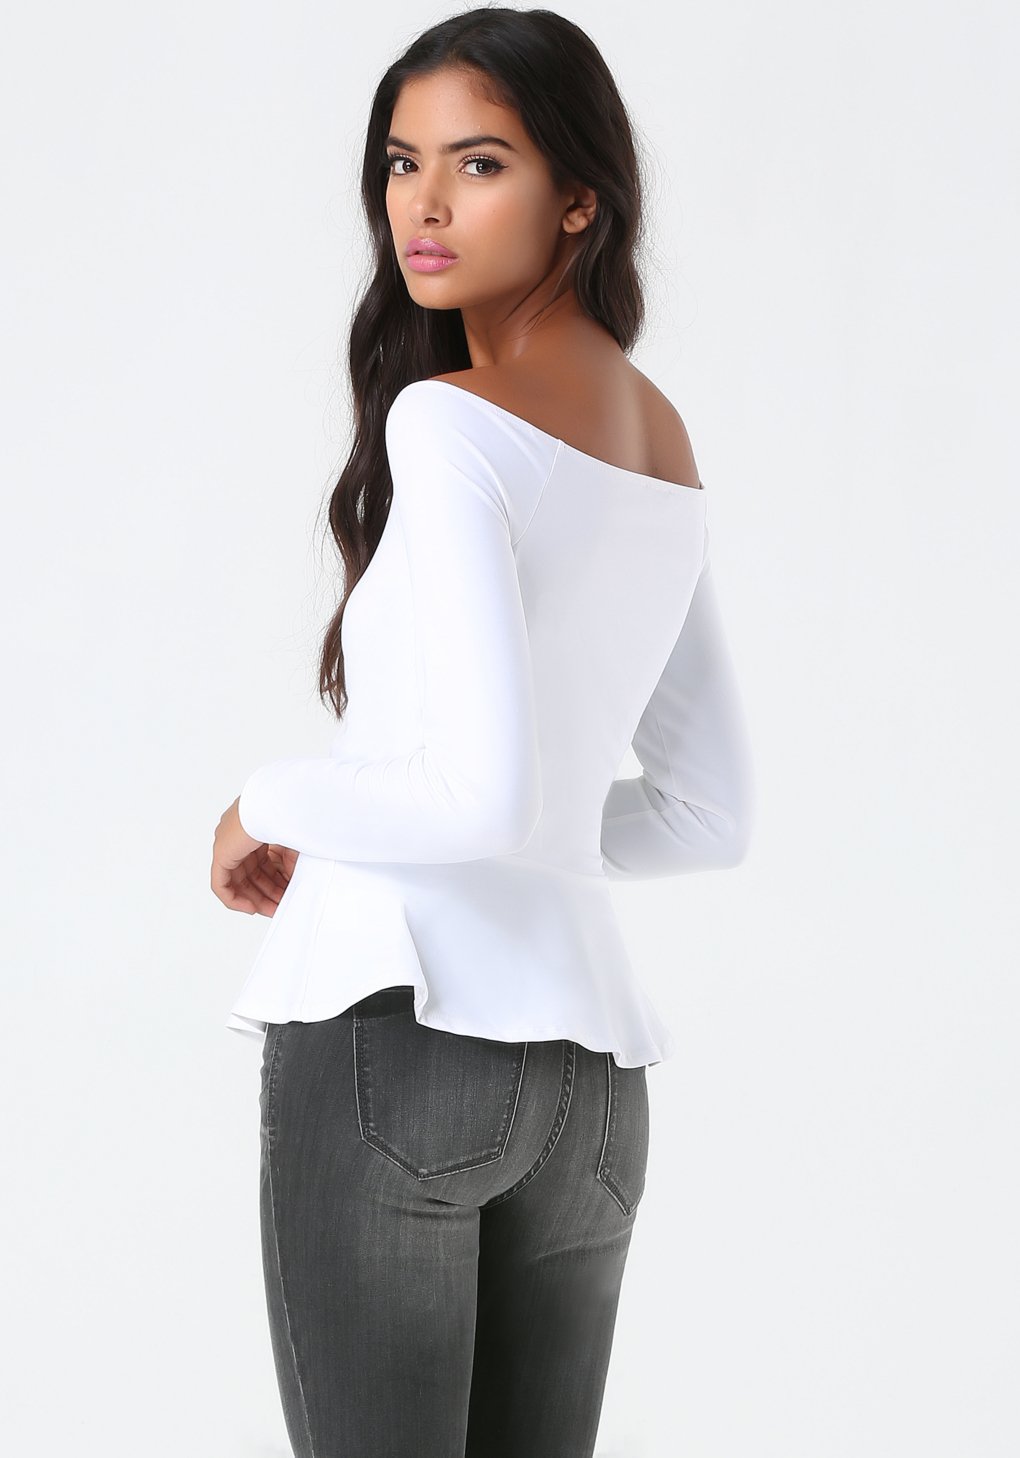 Bebe Synthetic Off Shoulder Peplum Top in White - Lyst